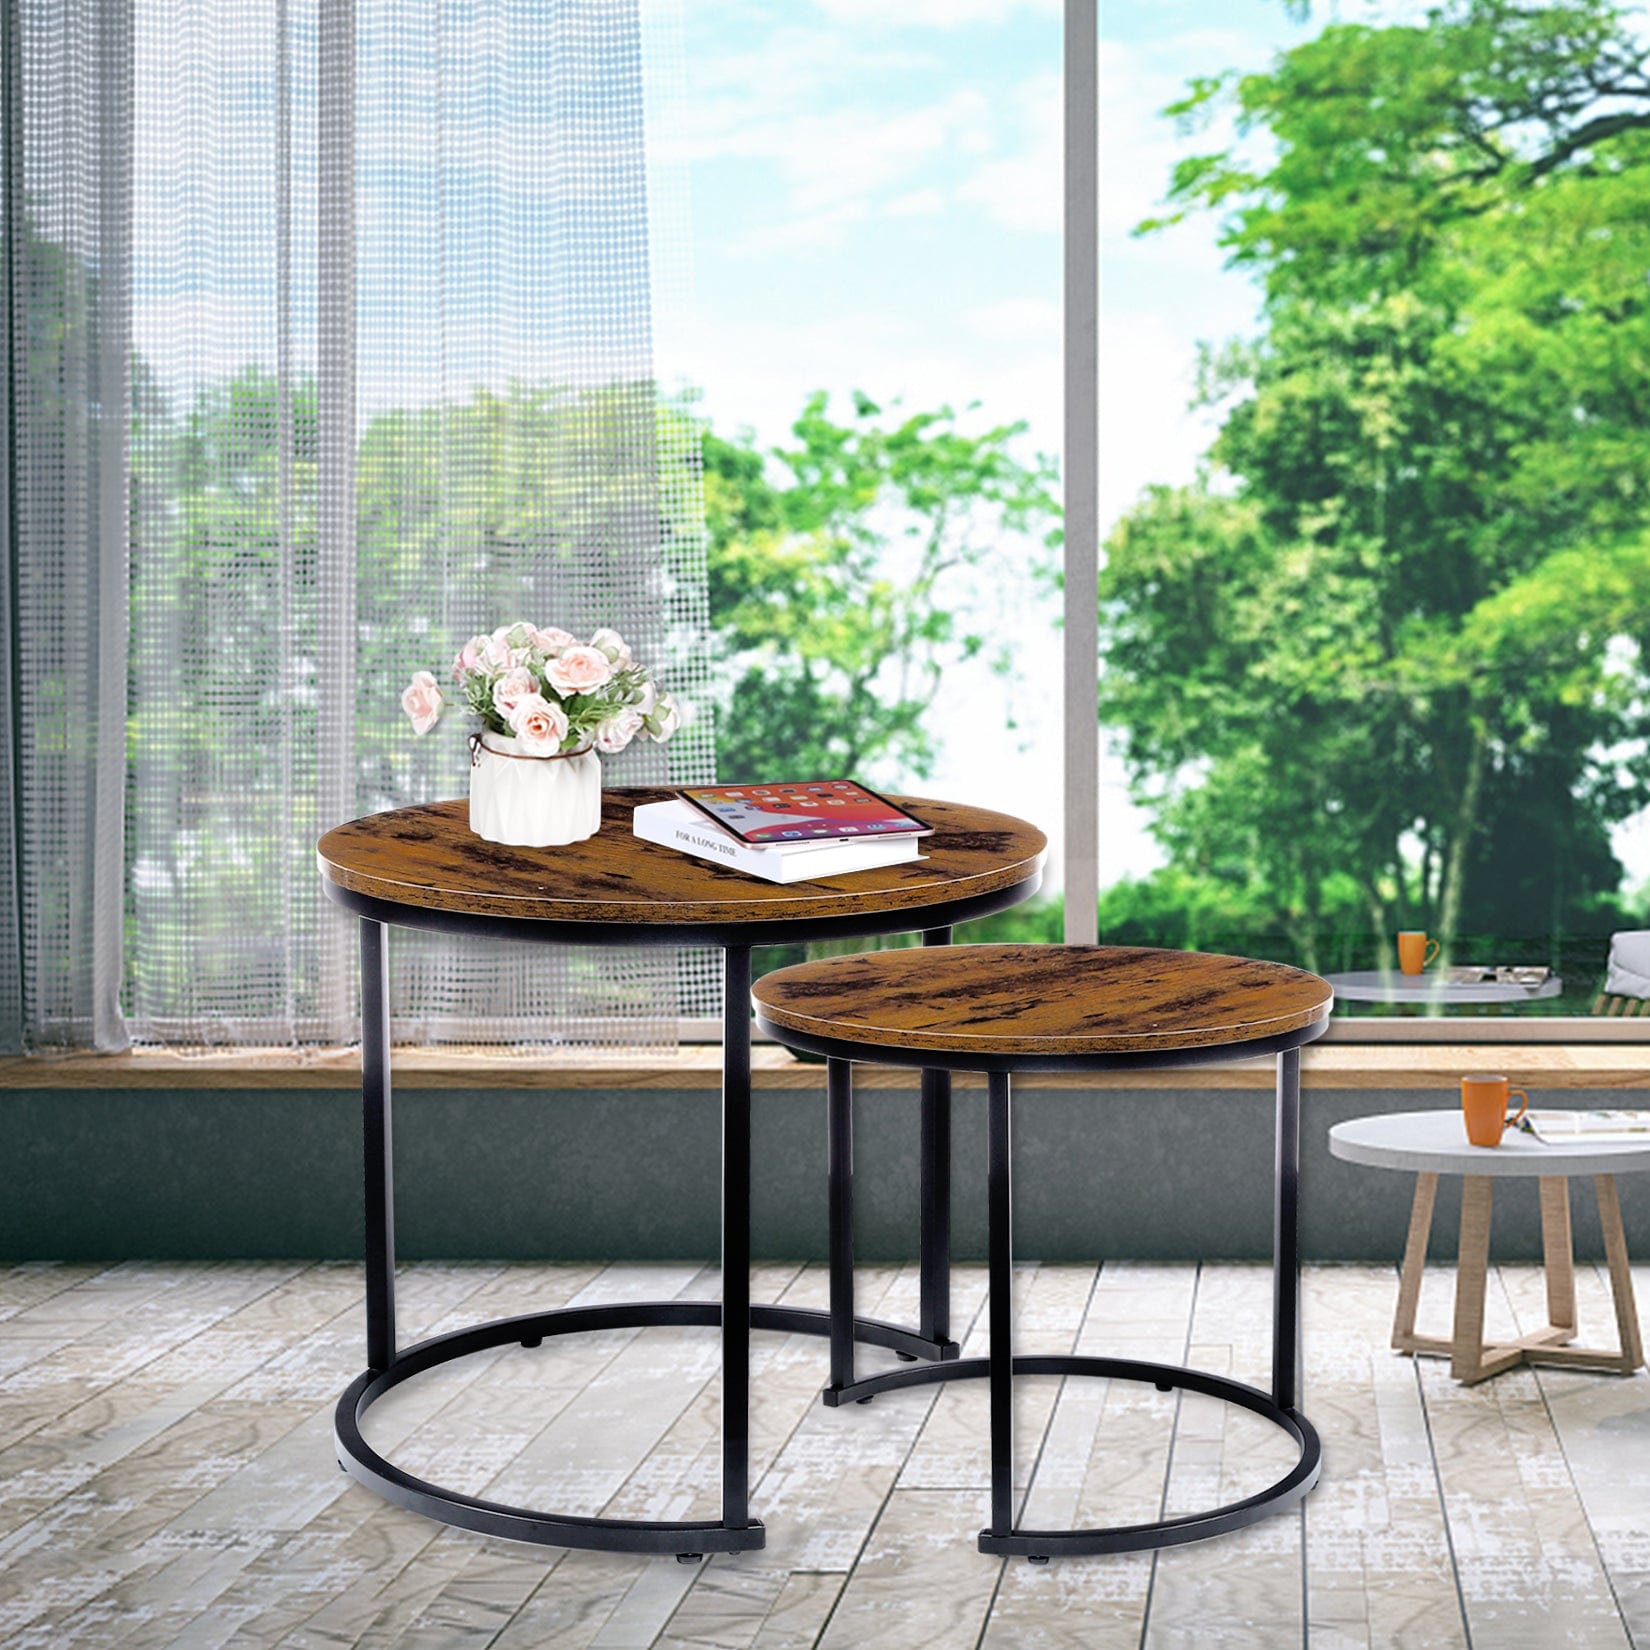 ShiningShow-Coffee-2-in-1-Sofa-side-Round-Nest-Tables-Wood-display-shelf